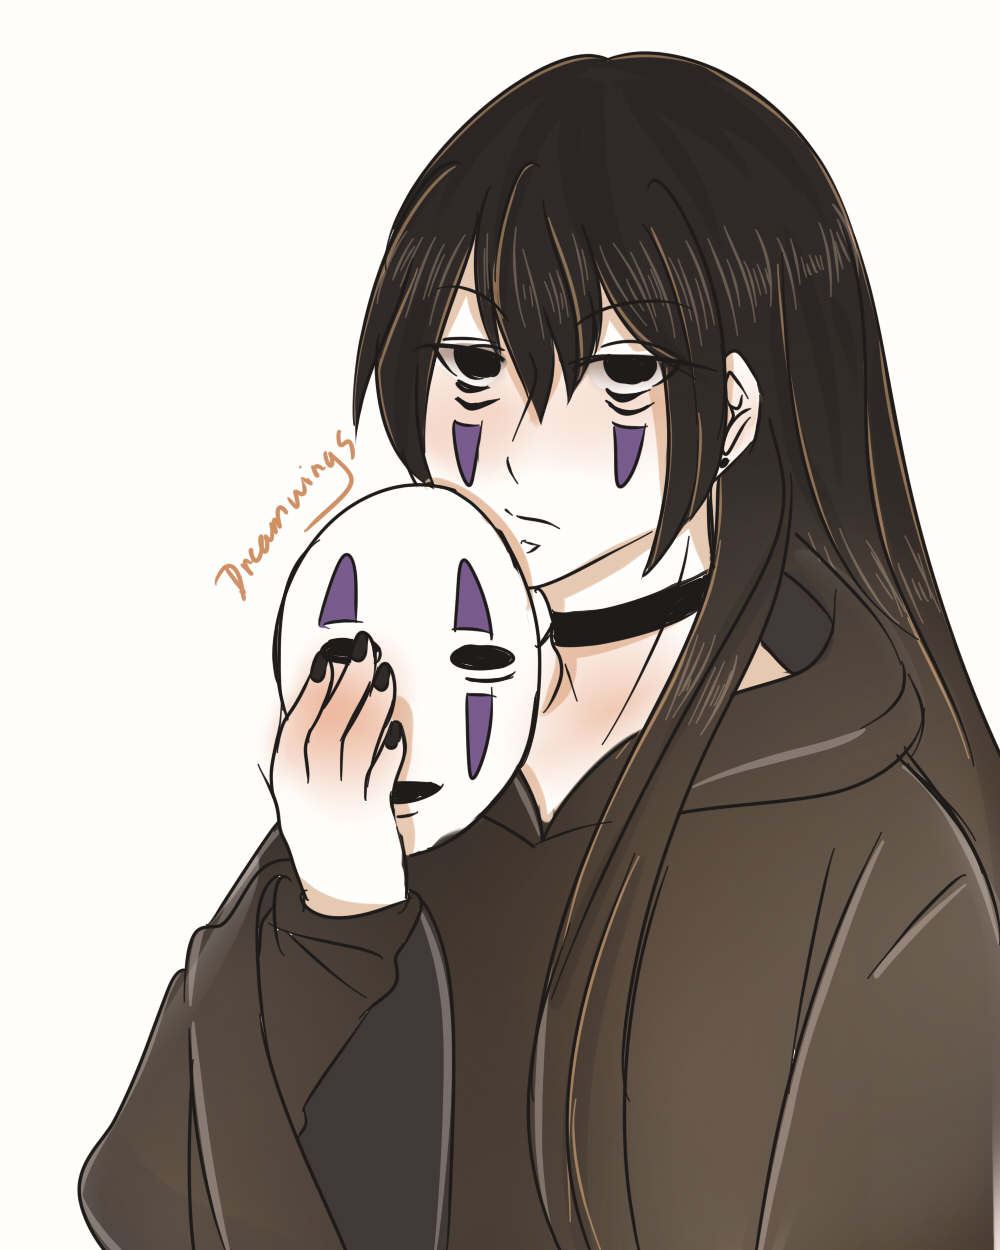 No Face Fanart (Spirited Away) by DreamwingsYNWAL30954 on DeviantArt